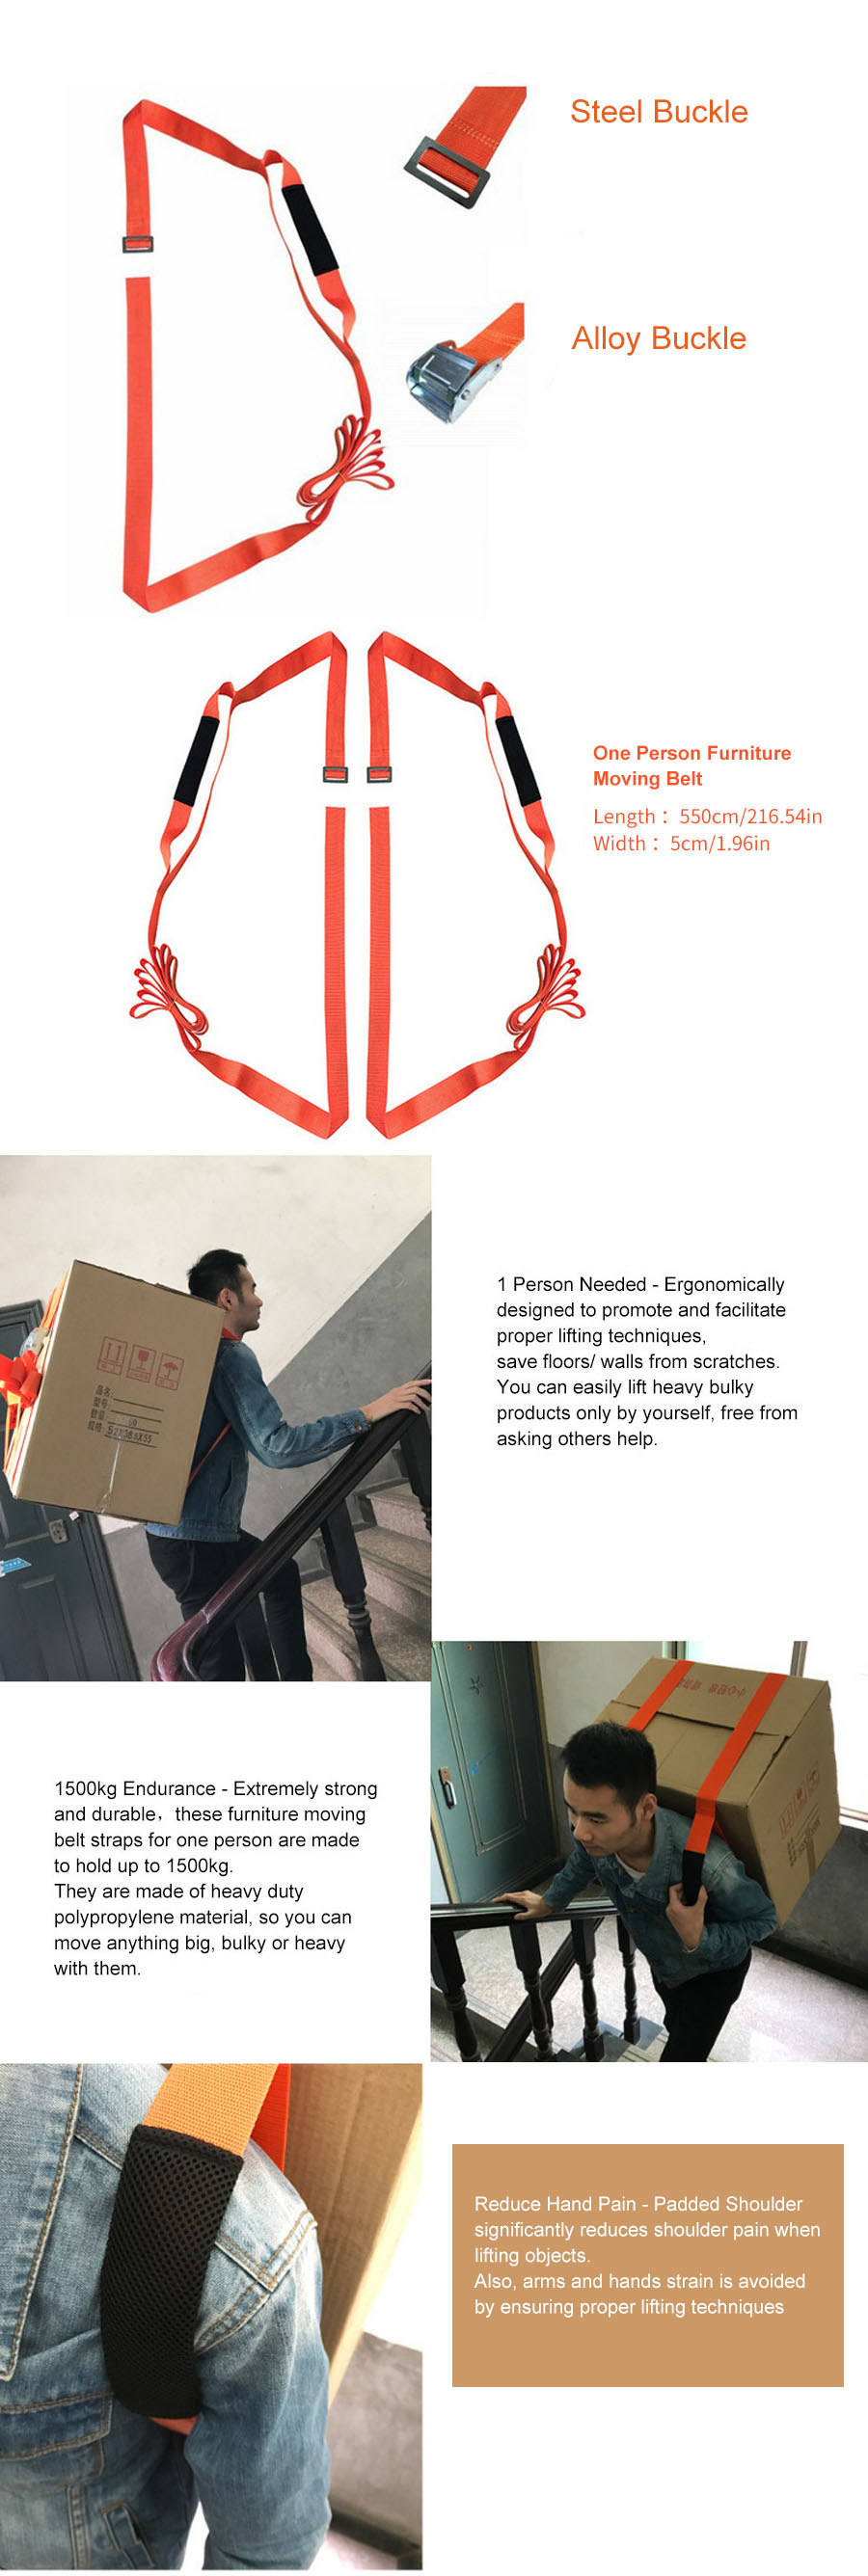 Details about   Heavy Furniture Appliances Moving Straps Rope Belt Transport Lifting Tool System